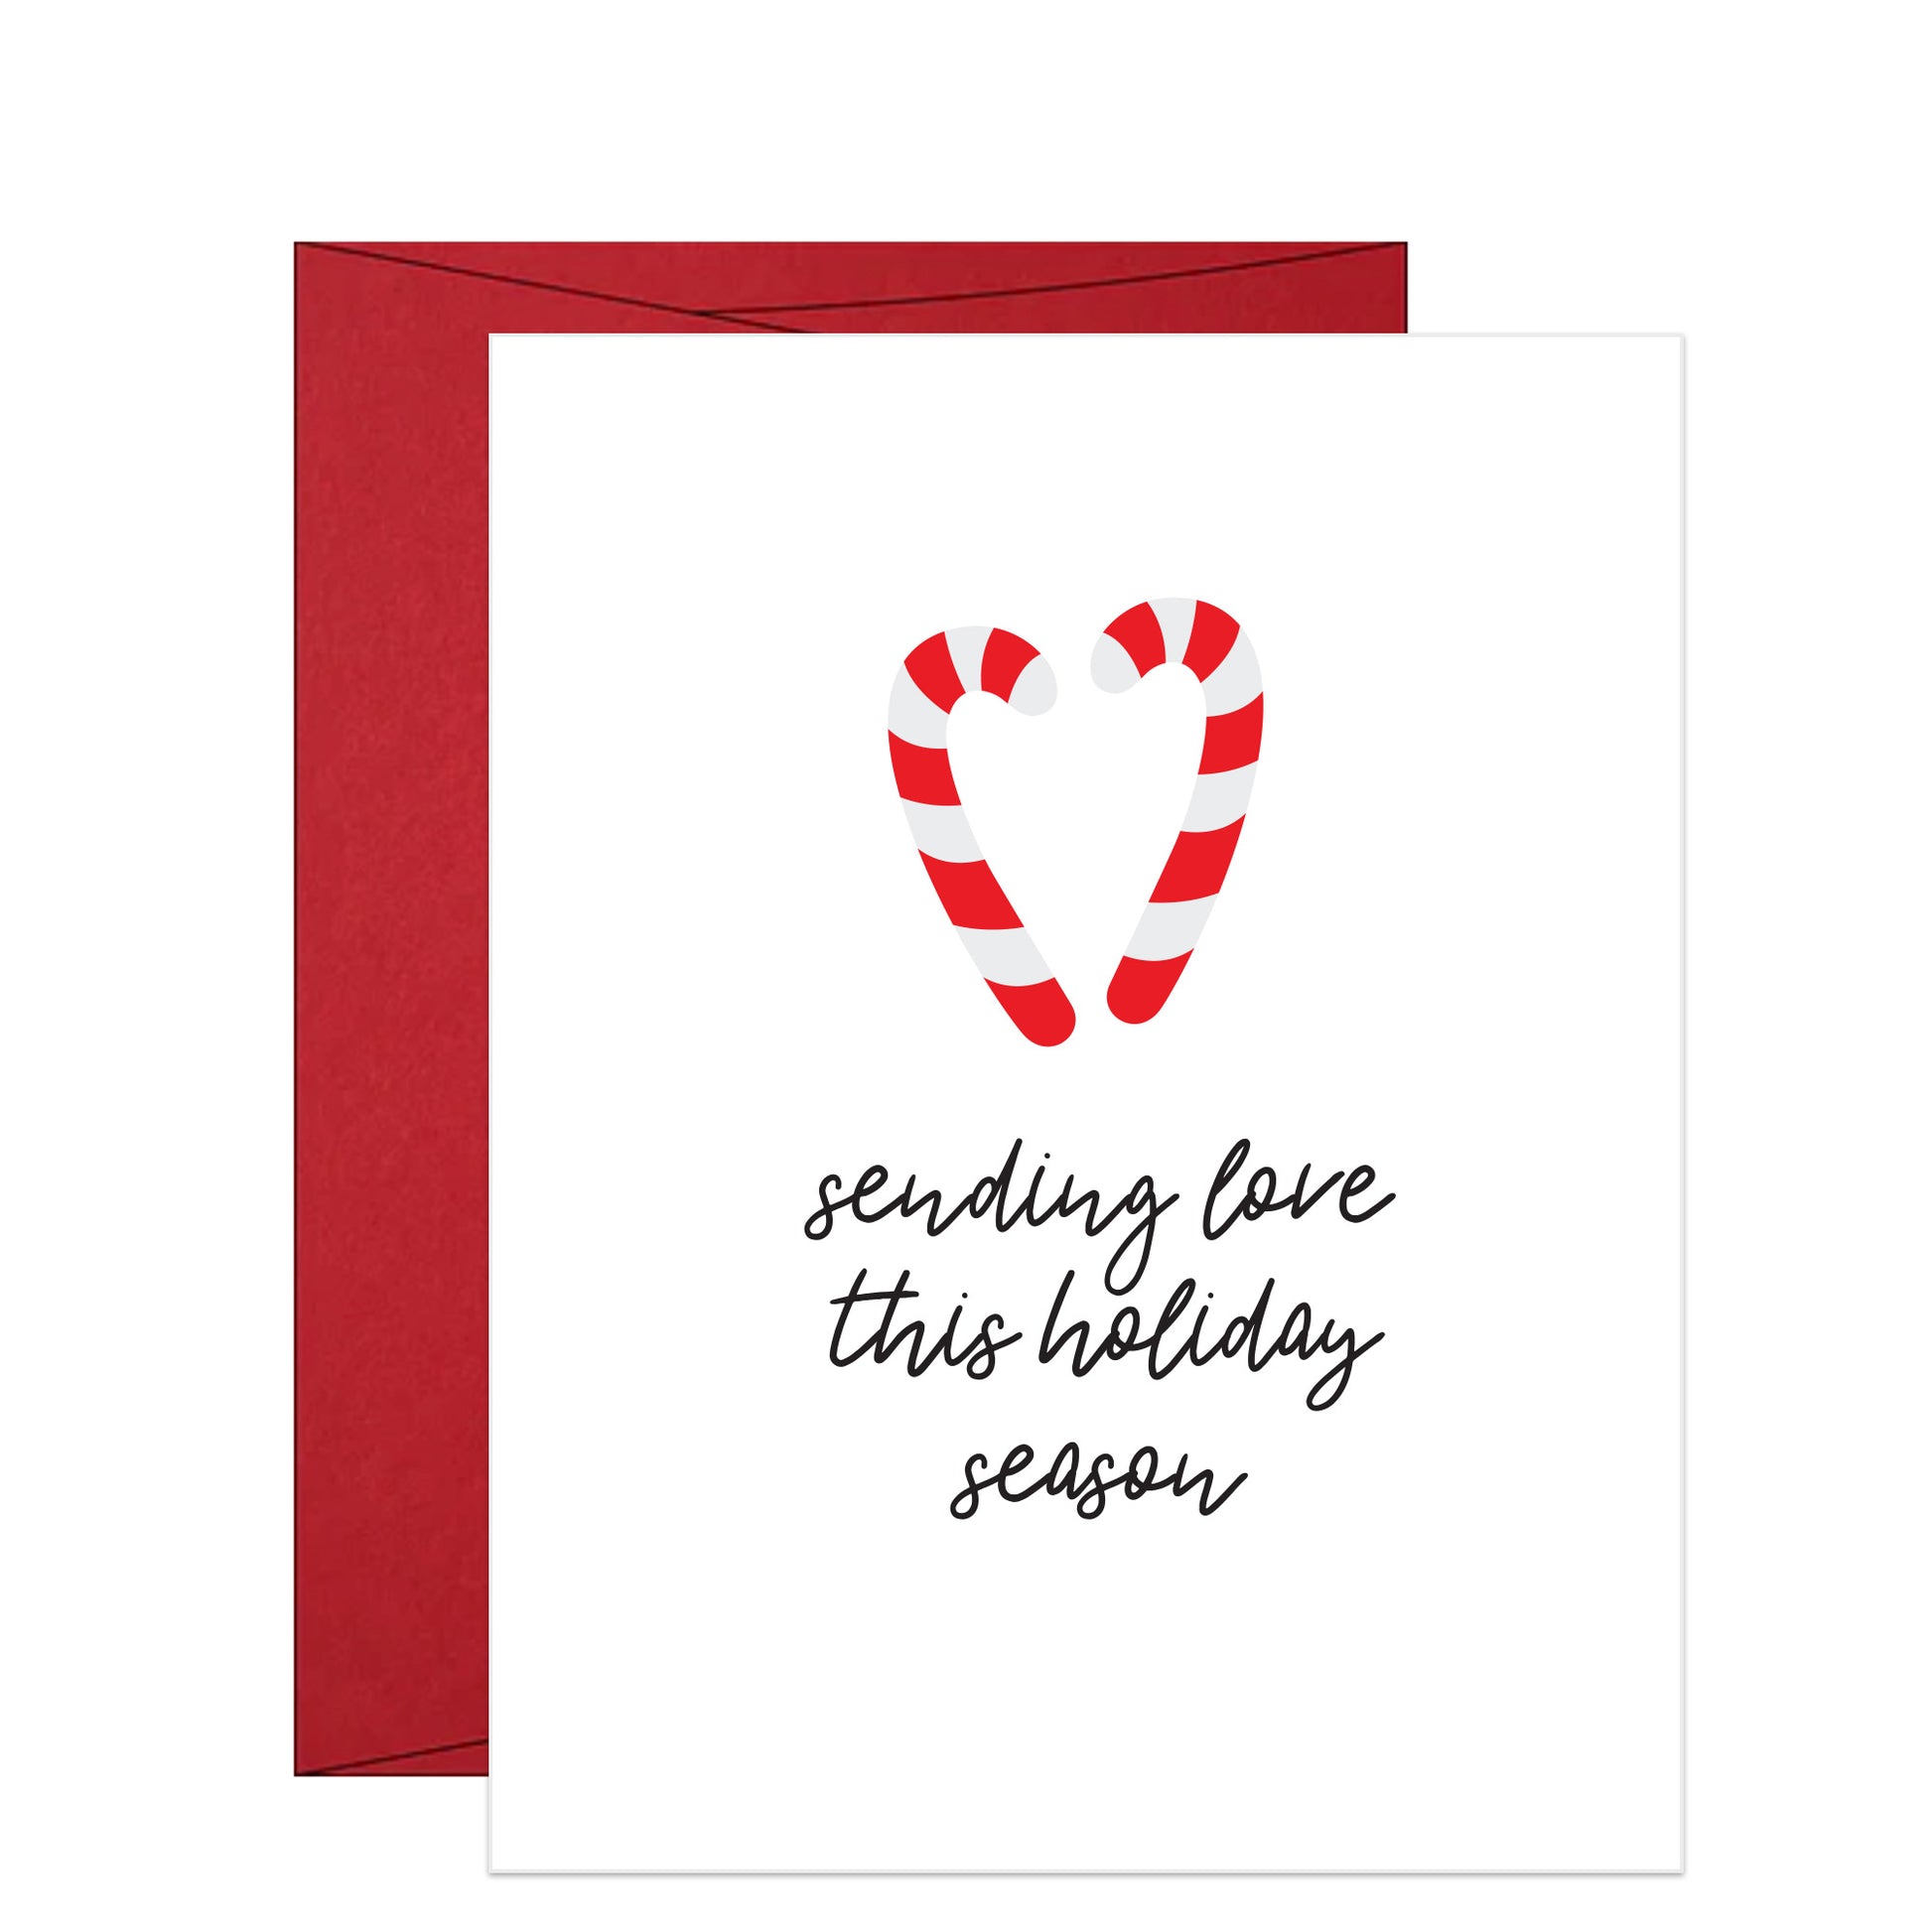 Sending love with candy canes holiday card